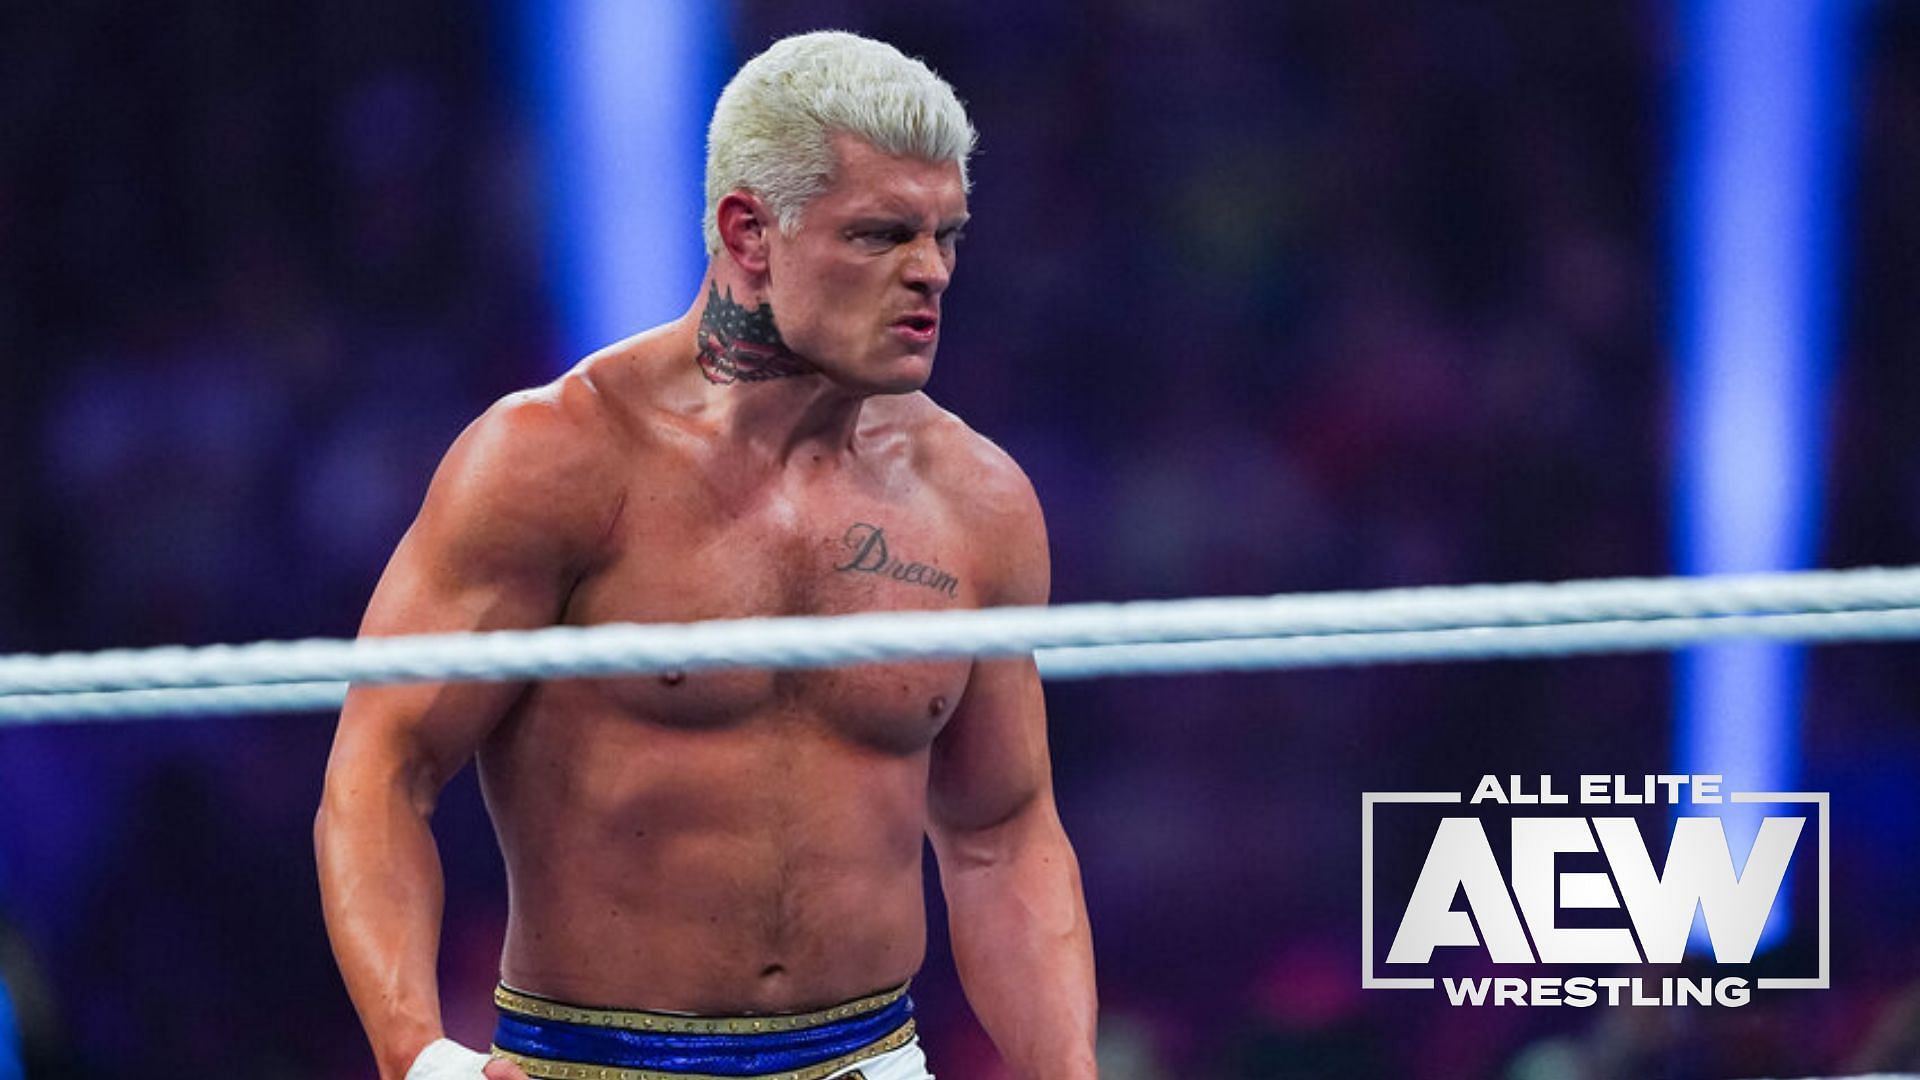 Cody left AEW last year and joined WWE